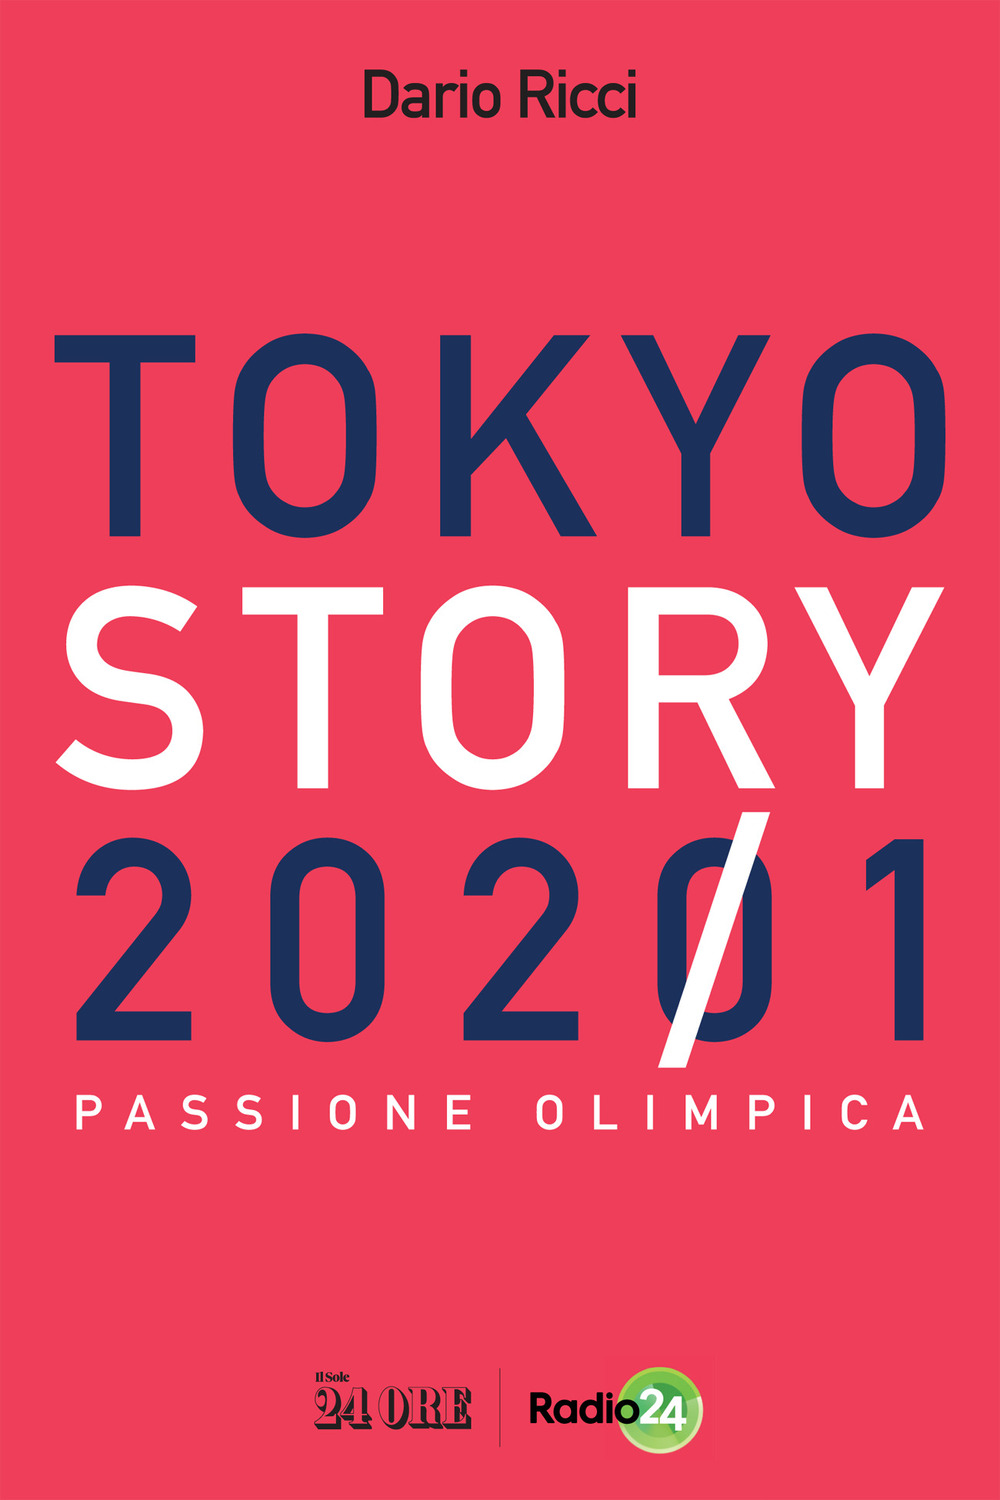 Tokyo story 2021. Passione olimpica